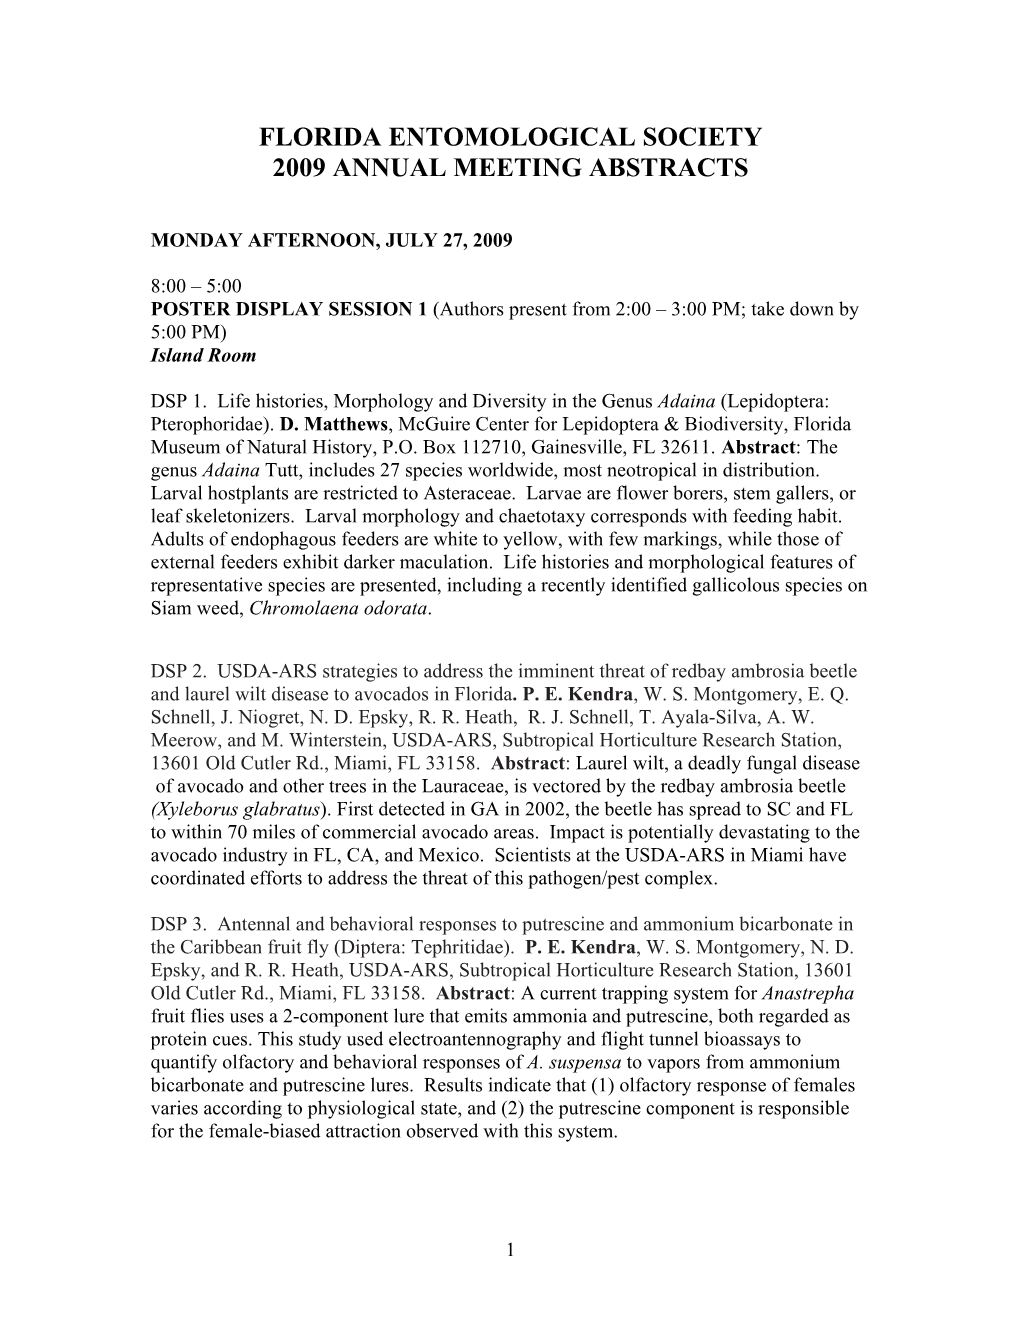 Link to Downloadable 2009 Annual Meeting Abstracts